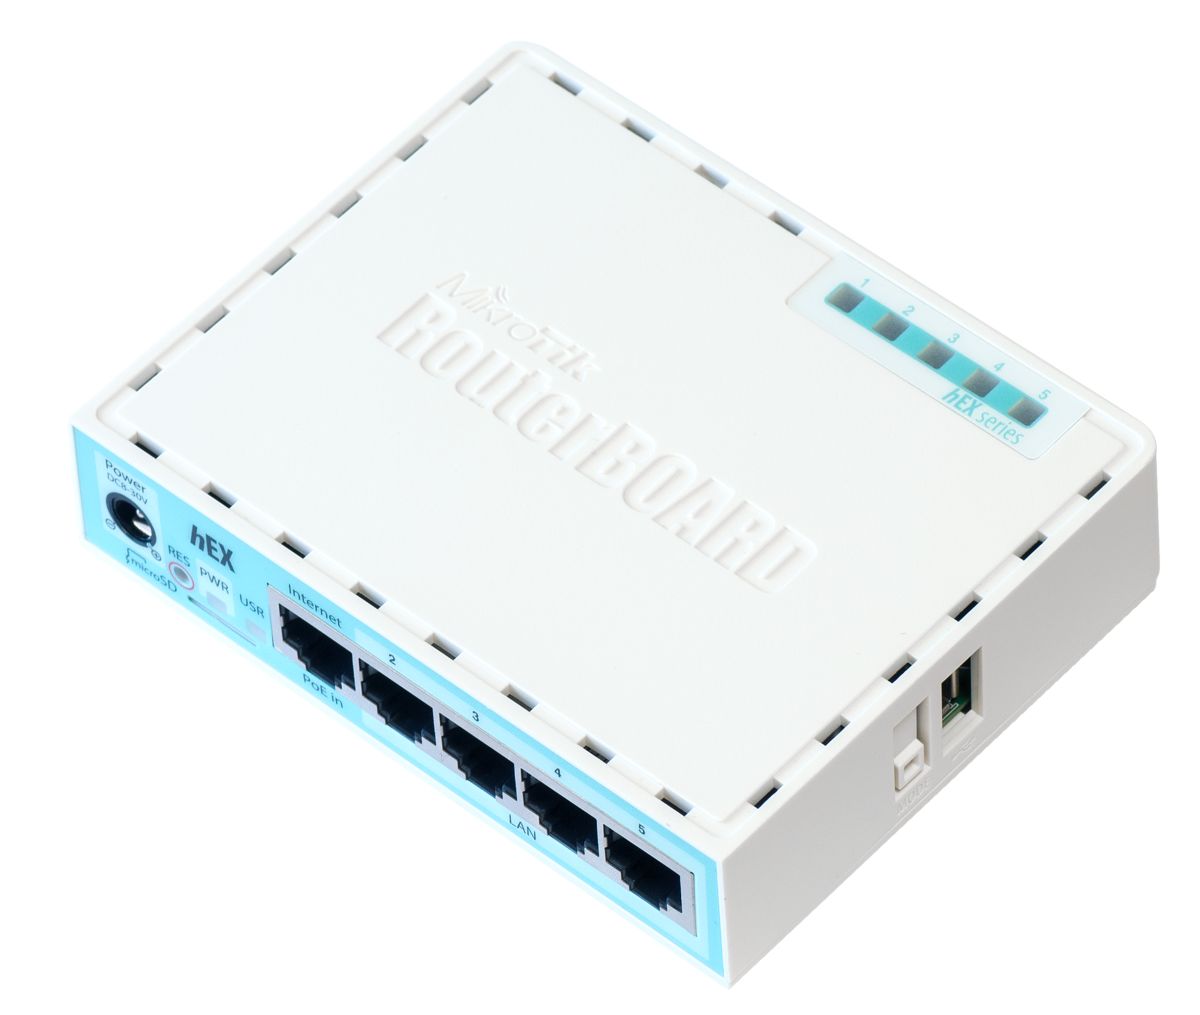 MIKROTIK RouterBOARD RB750GR3 hEX with Dual Core 880MHz MHz CPU 256MB RAM 5 Gigabit LAN Router_1